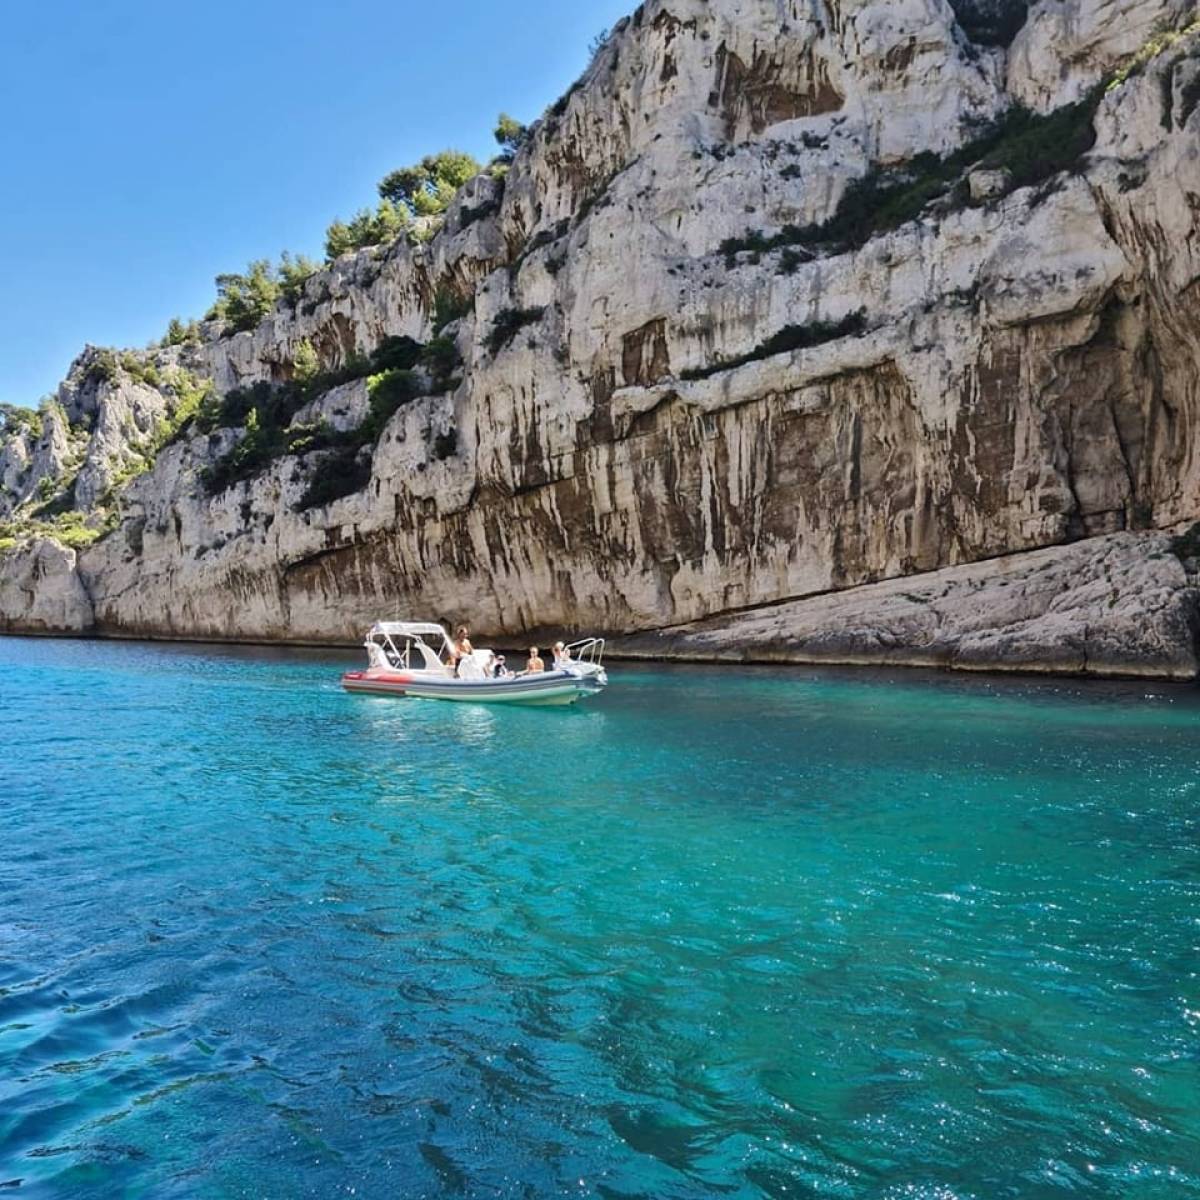 Sail into serenity with Eden Boat's Calanques adventure, a unique maritime experience from Cassis